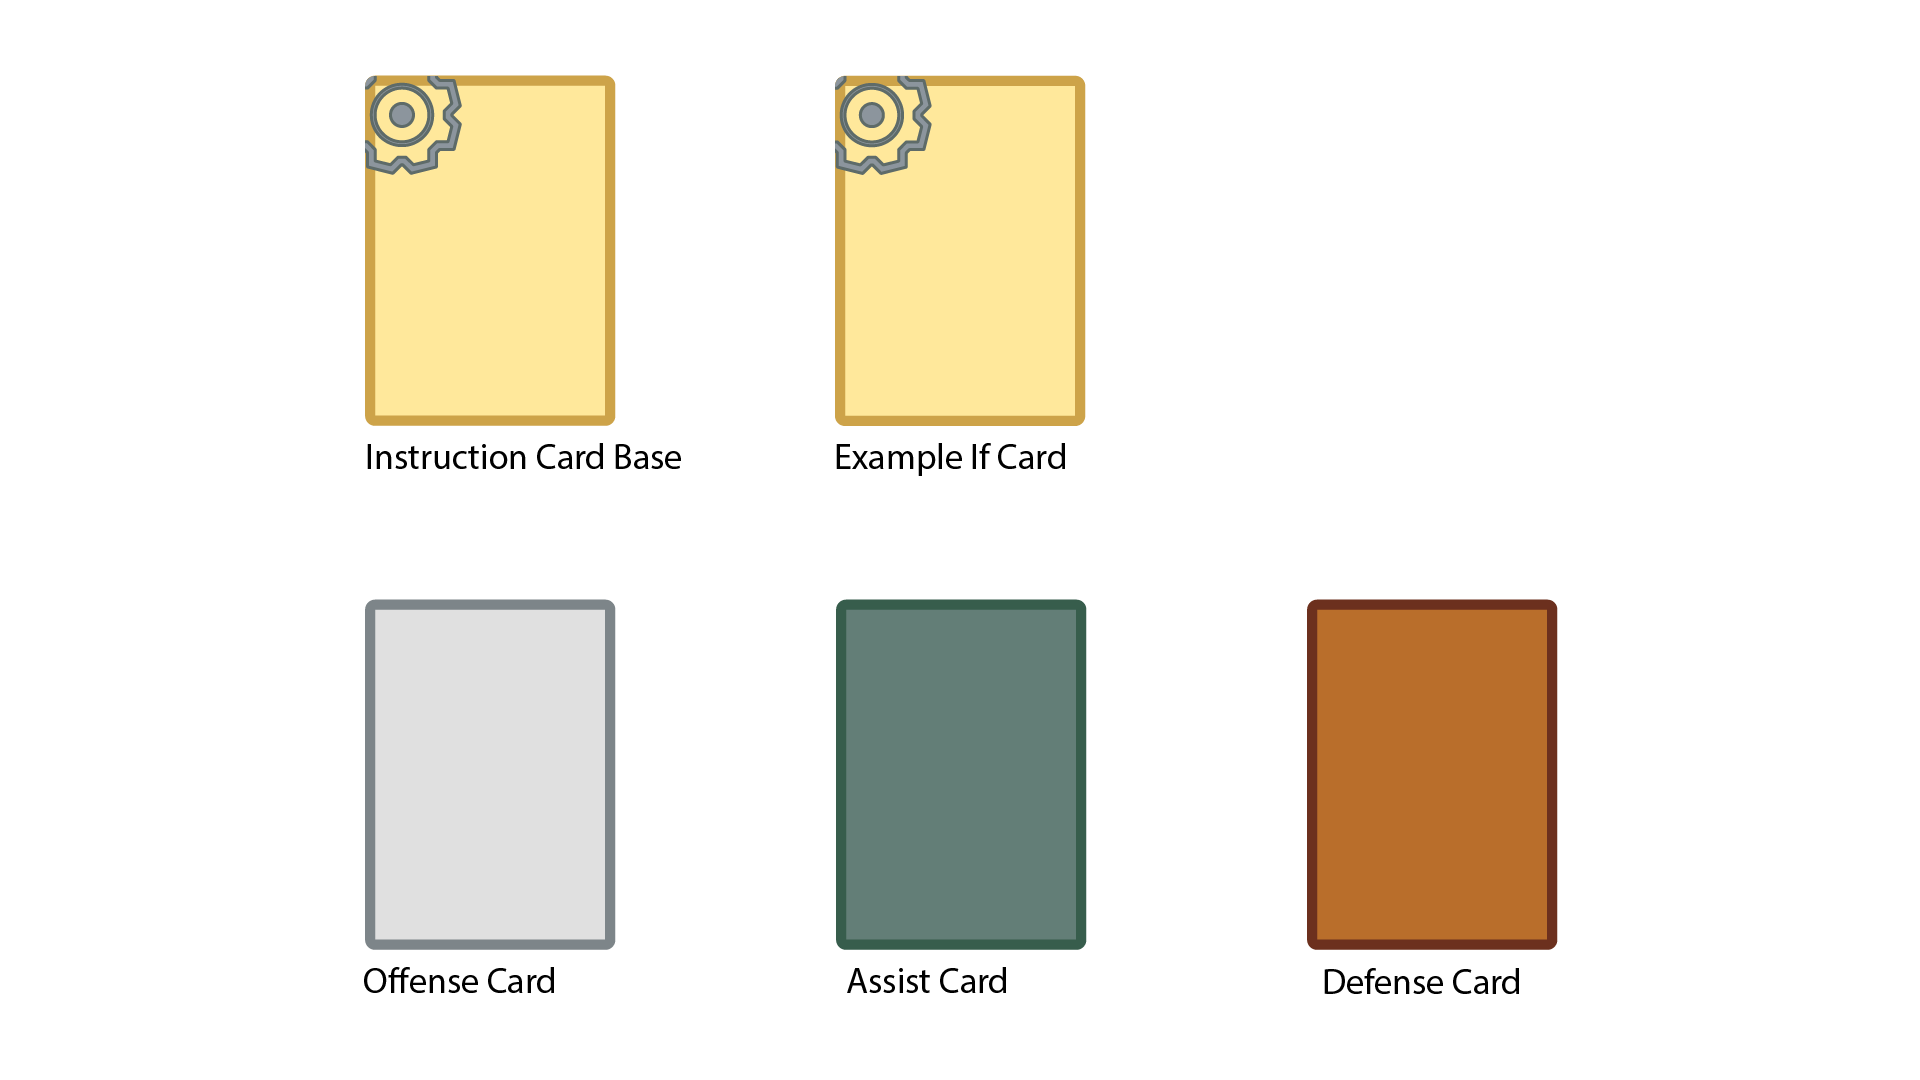 Ancient style visuals for Flowgram. The blank card this time has a gear in the top right, with the background being the color of old parchment. The three unit cards below are a darker metal color, a lighter metal color, and a bronze color.